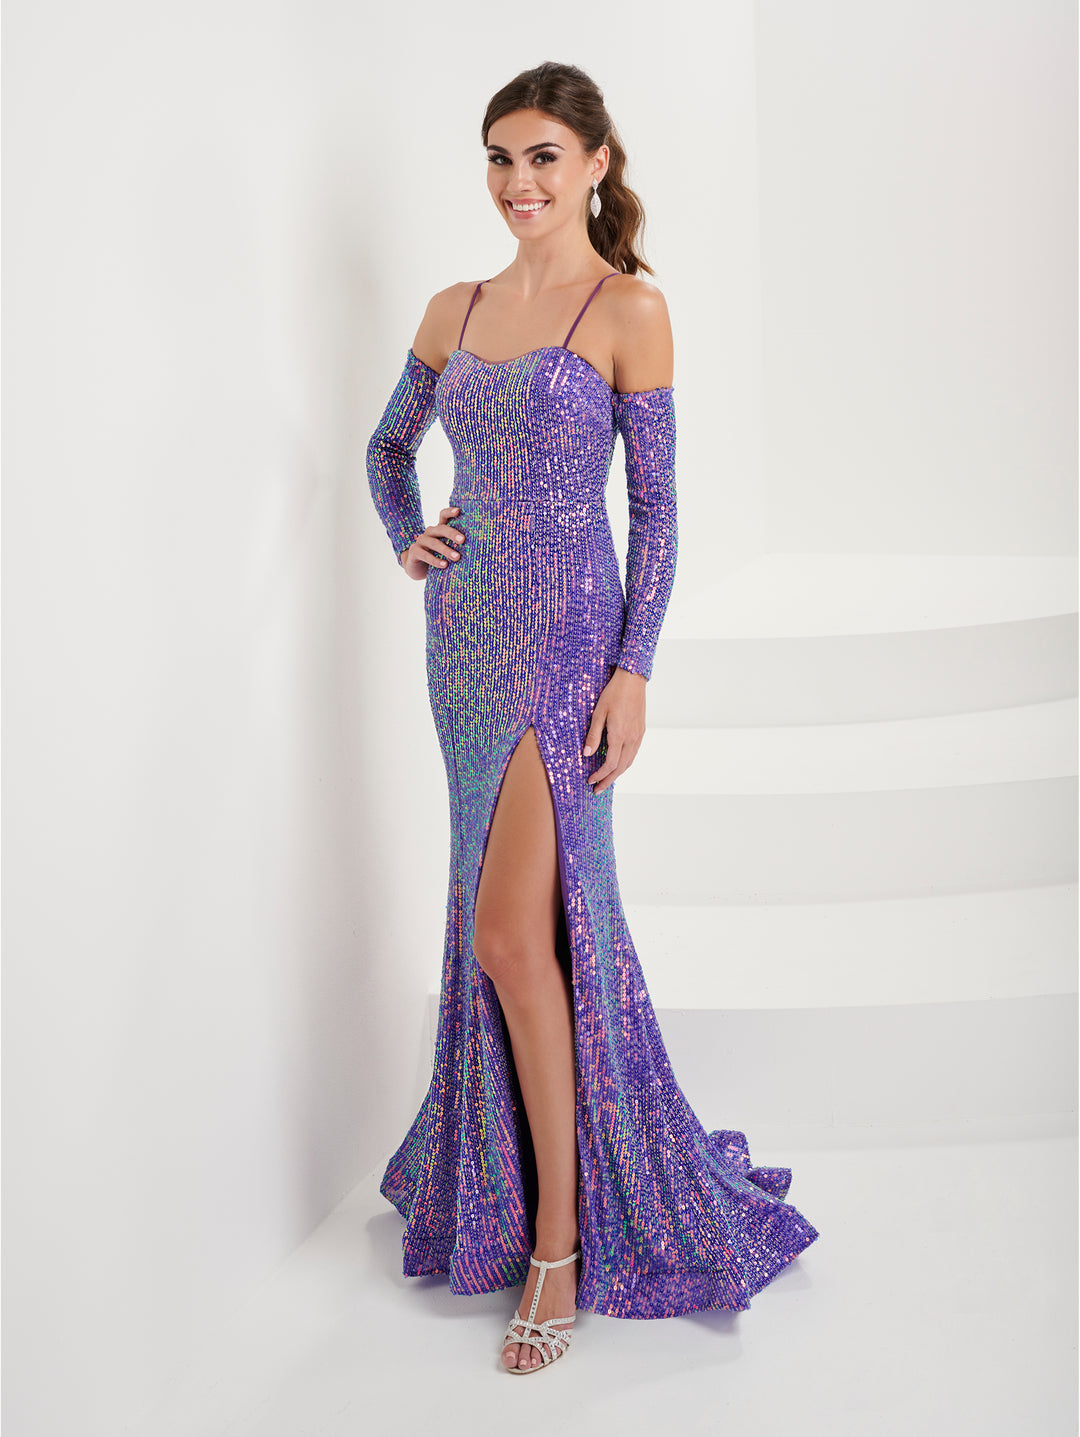 Fitted Sequin Long Sleeve Slit Gown by Tiffany Designs 16090